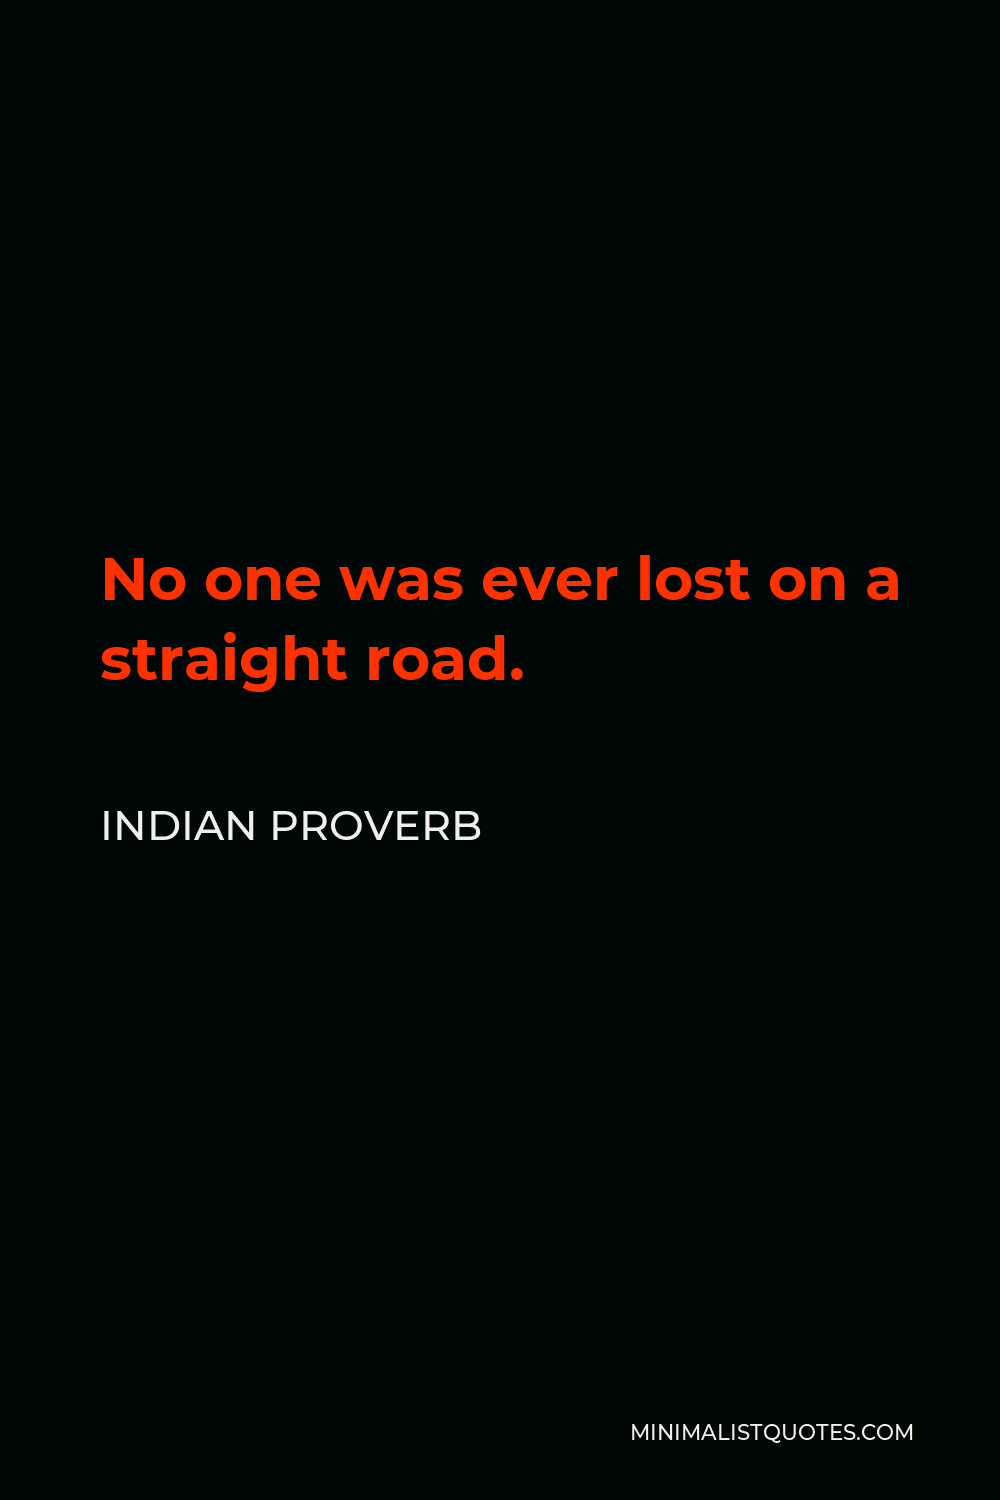 Indian Proverb Quote - No one was ever lost on a straight road.